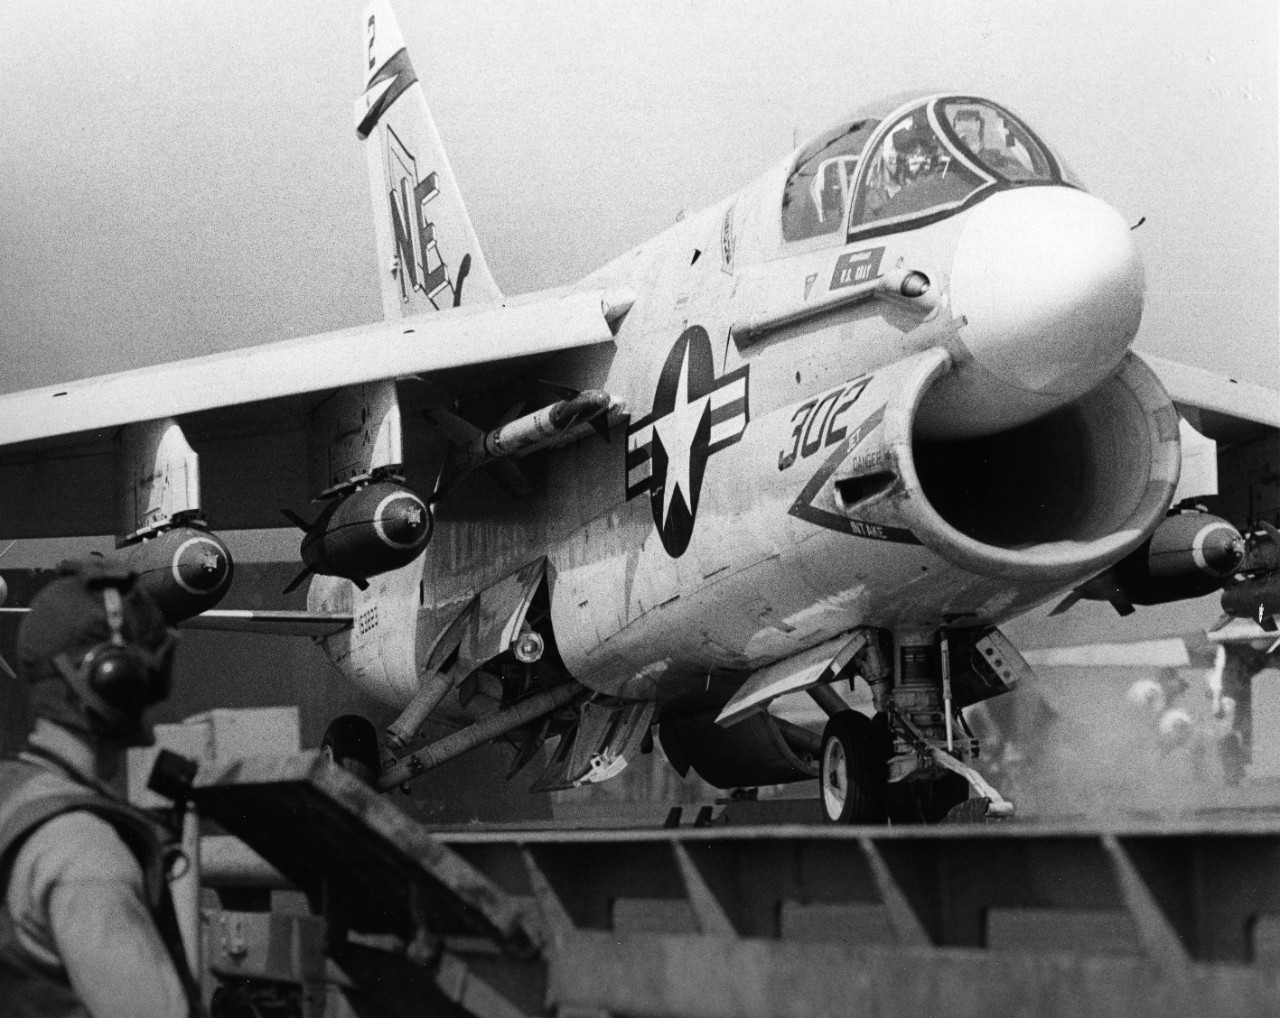 A-7 Corsair II of VA-147, on the catapult of an attack carrier of the U.S. Seventh Fleet.